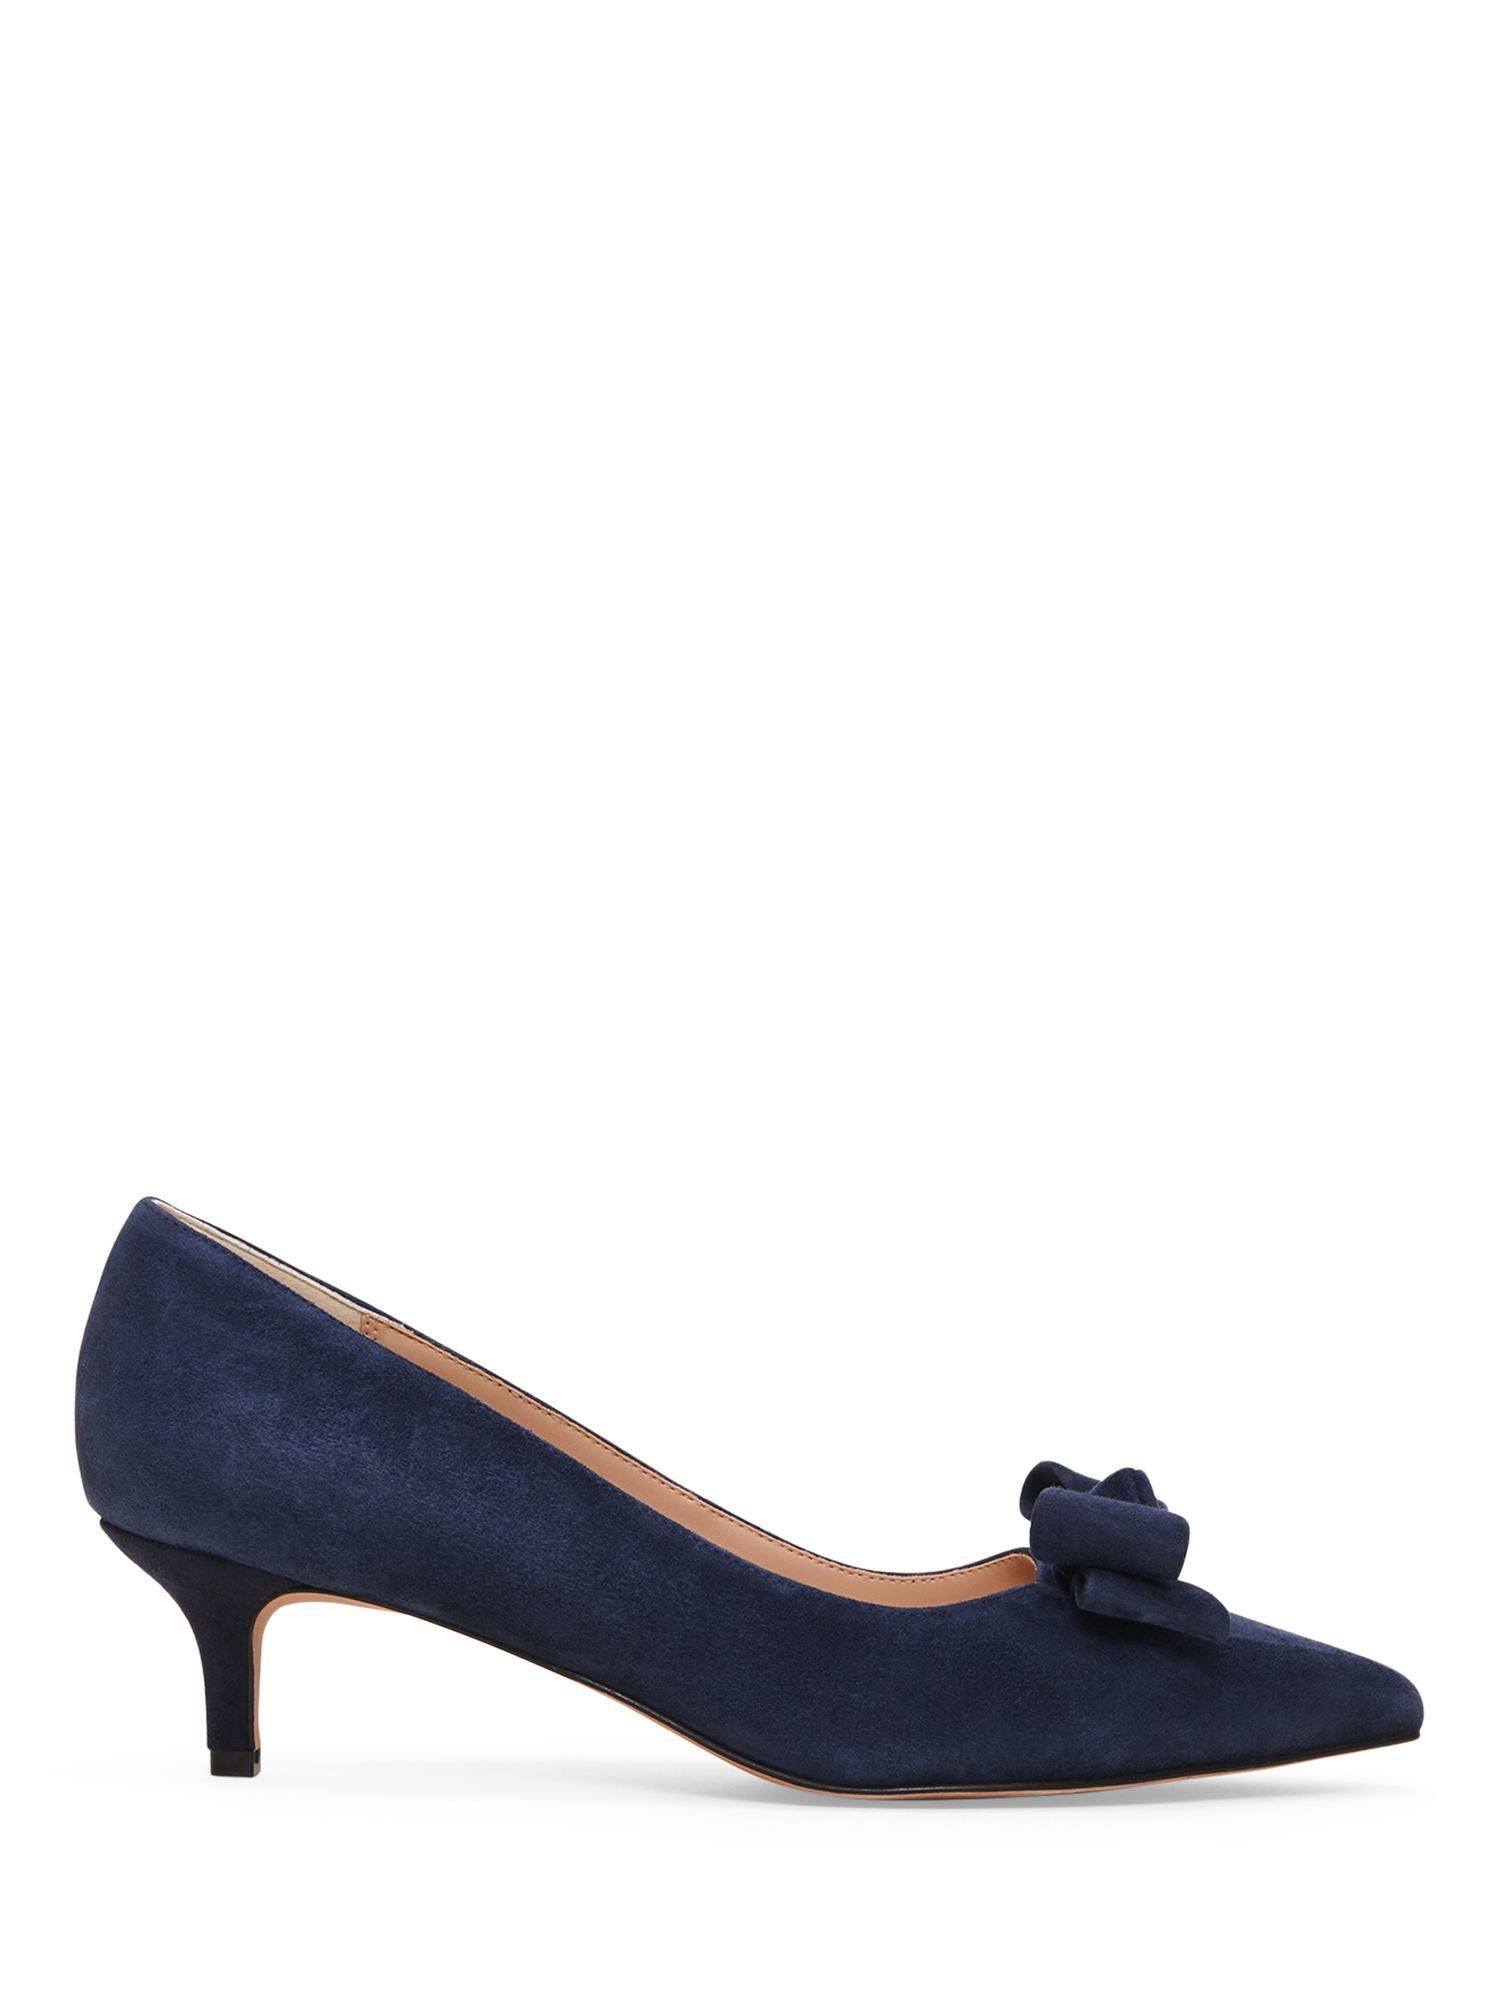 Phase Eight Structured Bow Kitten Heel Shoes, Navy, 3